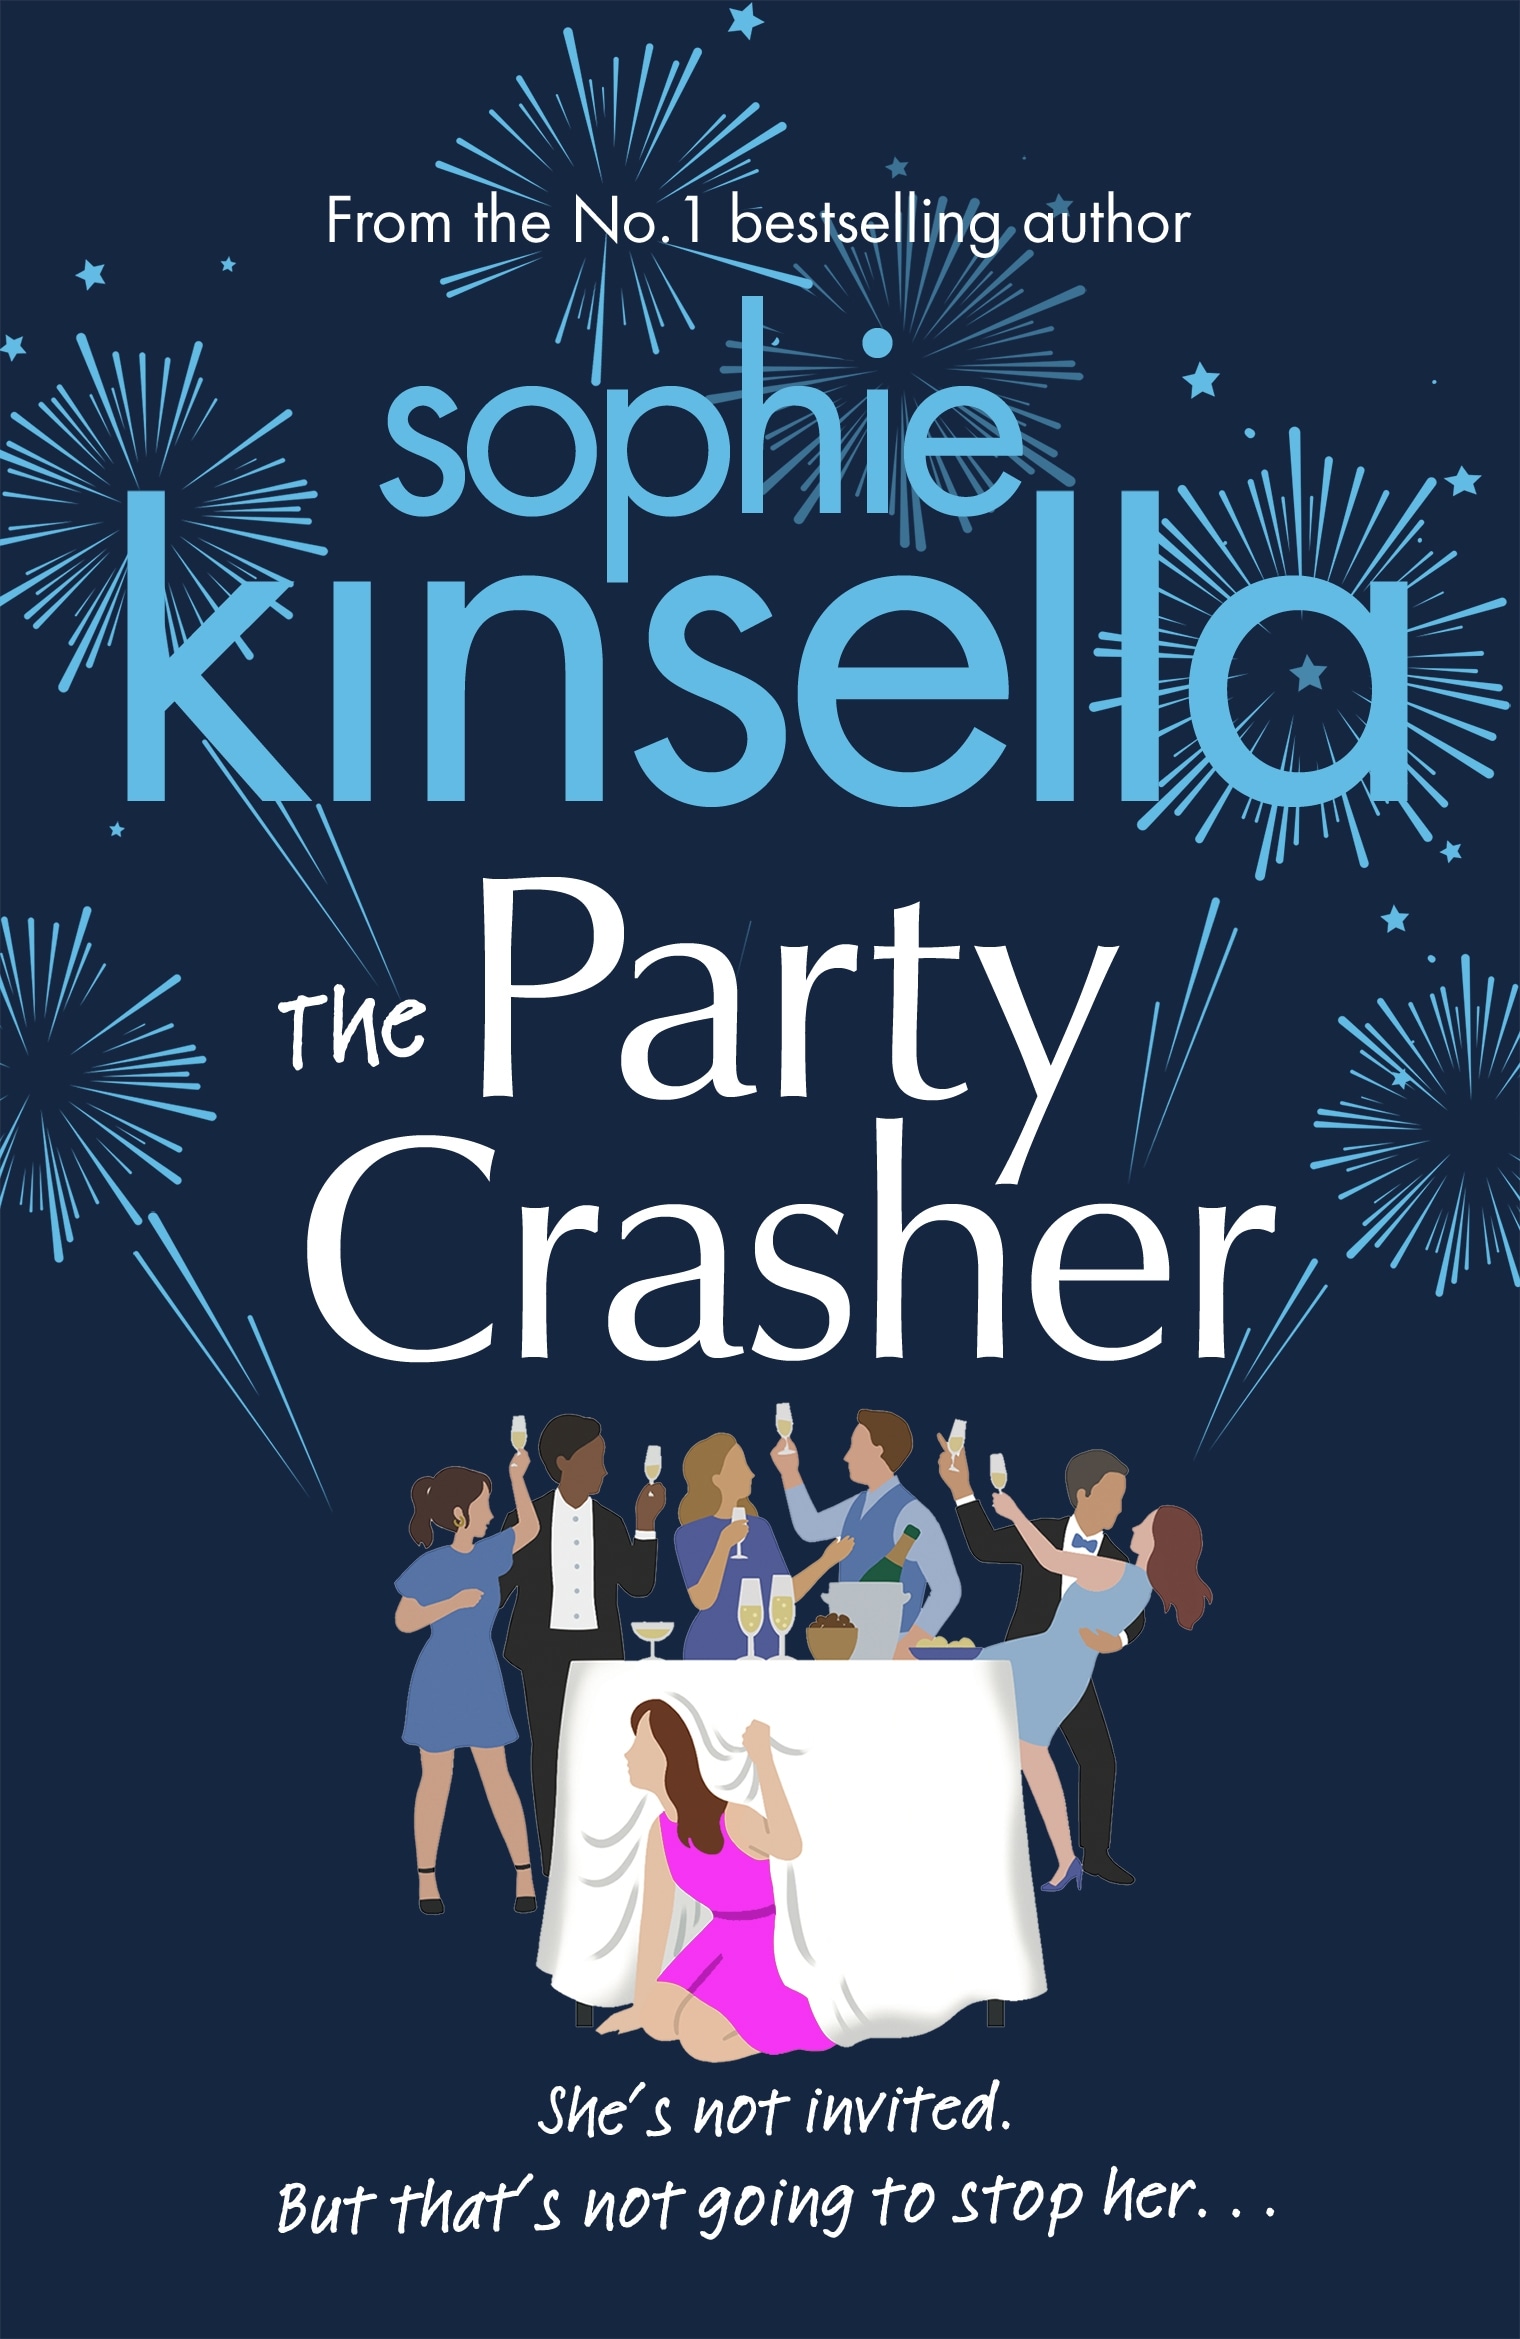 Book “The Party Crasher” by Sophie Kinsella — July 7, 2022